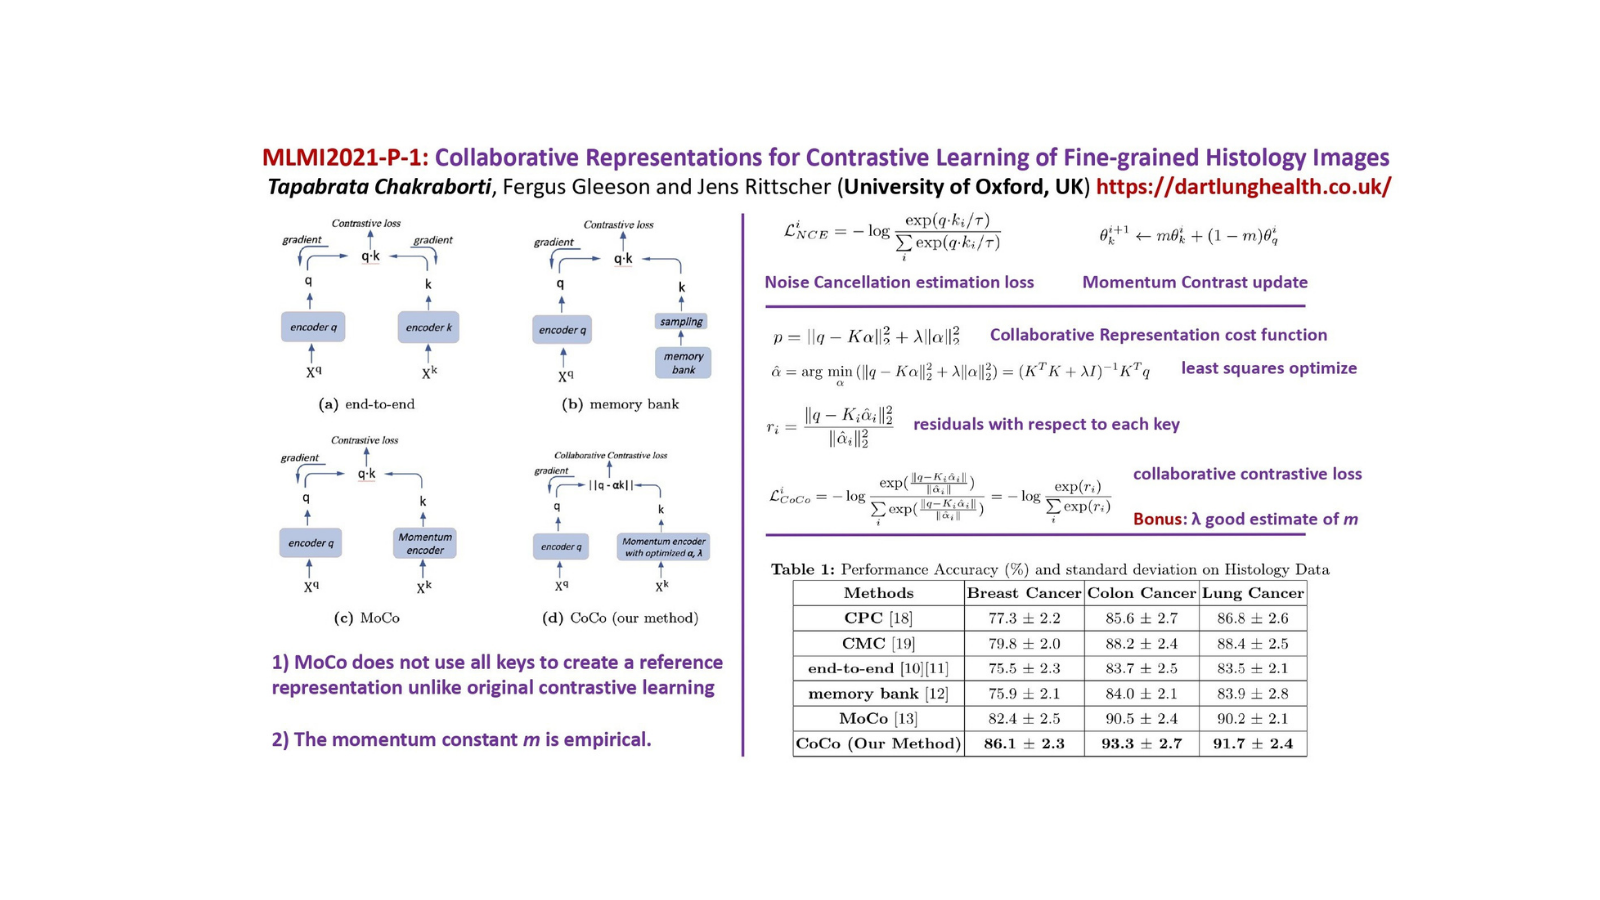 Calculations used in paper on collaborative representations for contrastive learning.